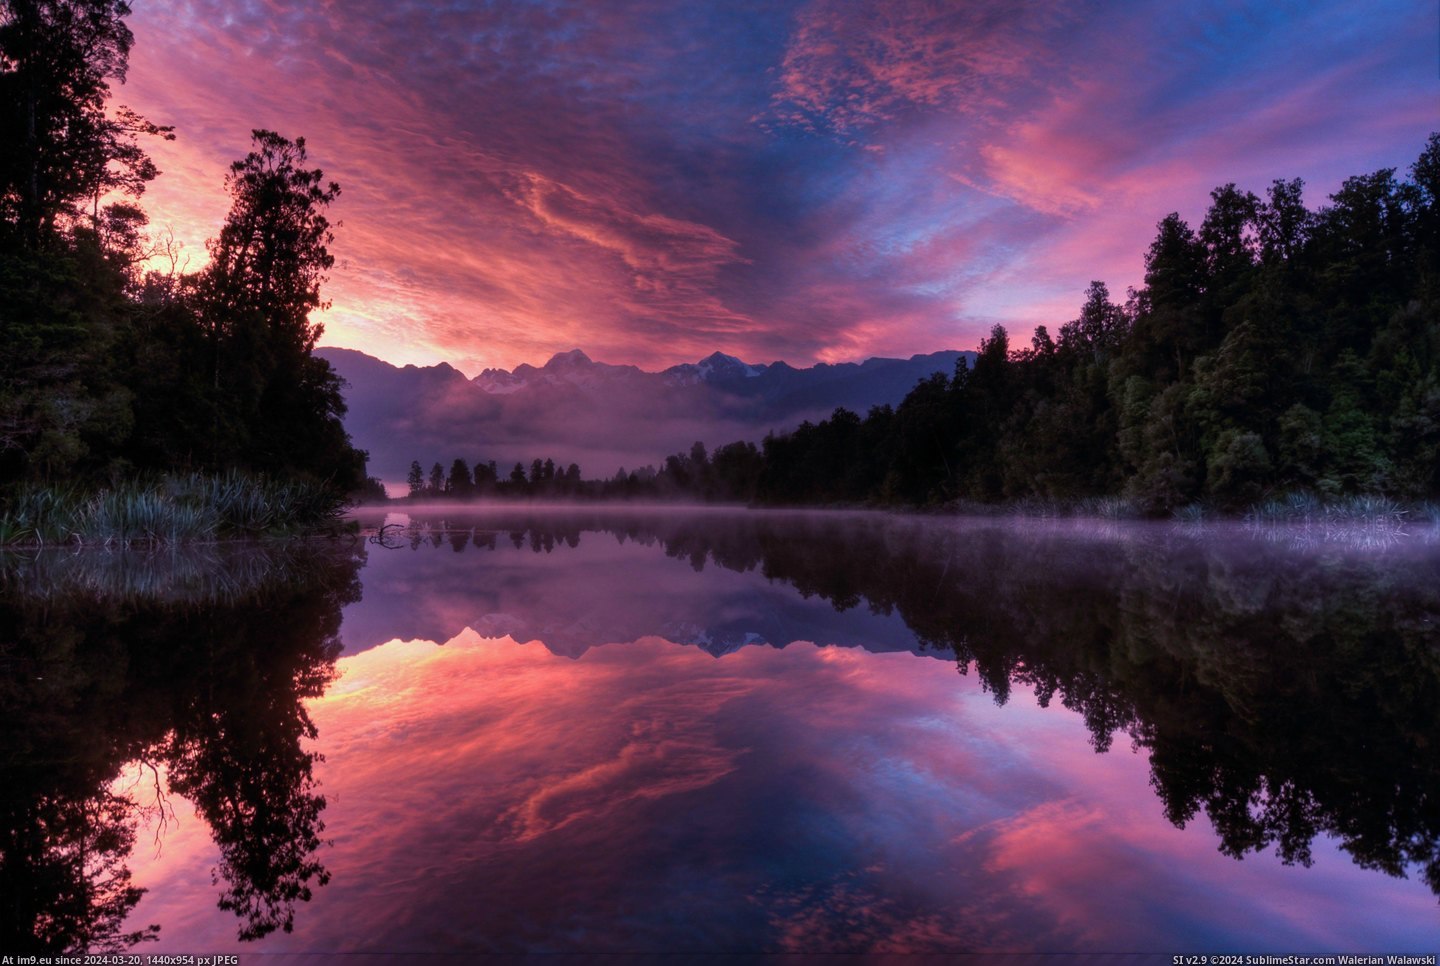 #One #Photos #Lake #Glacier #Mentioned #Fox #Zealand #Sunrise [Earthporn] Someone mentioned we need more New Zealand photos, so here's one I took at Lake Matheson near Fox Glacier at sunrise Pic. (Image of album My r/EARTHPORN favs))